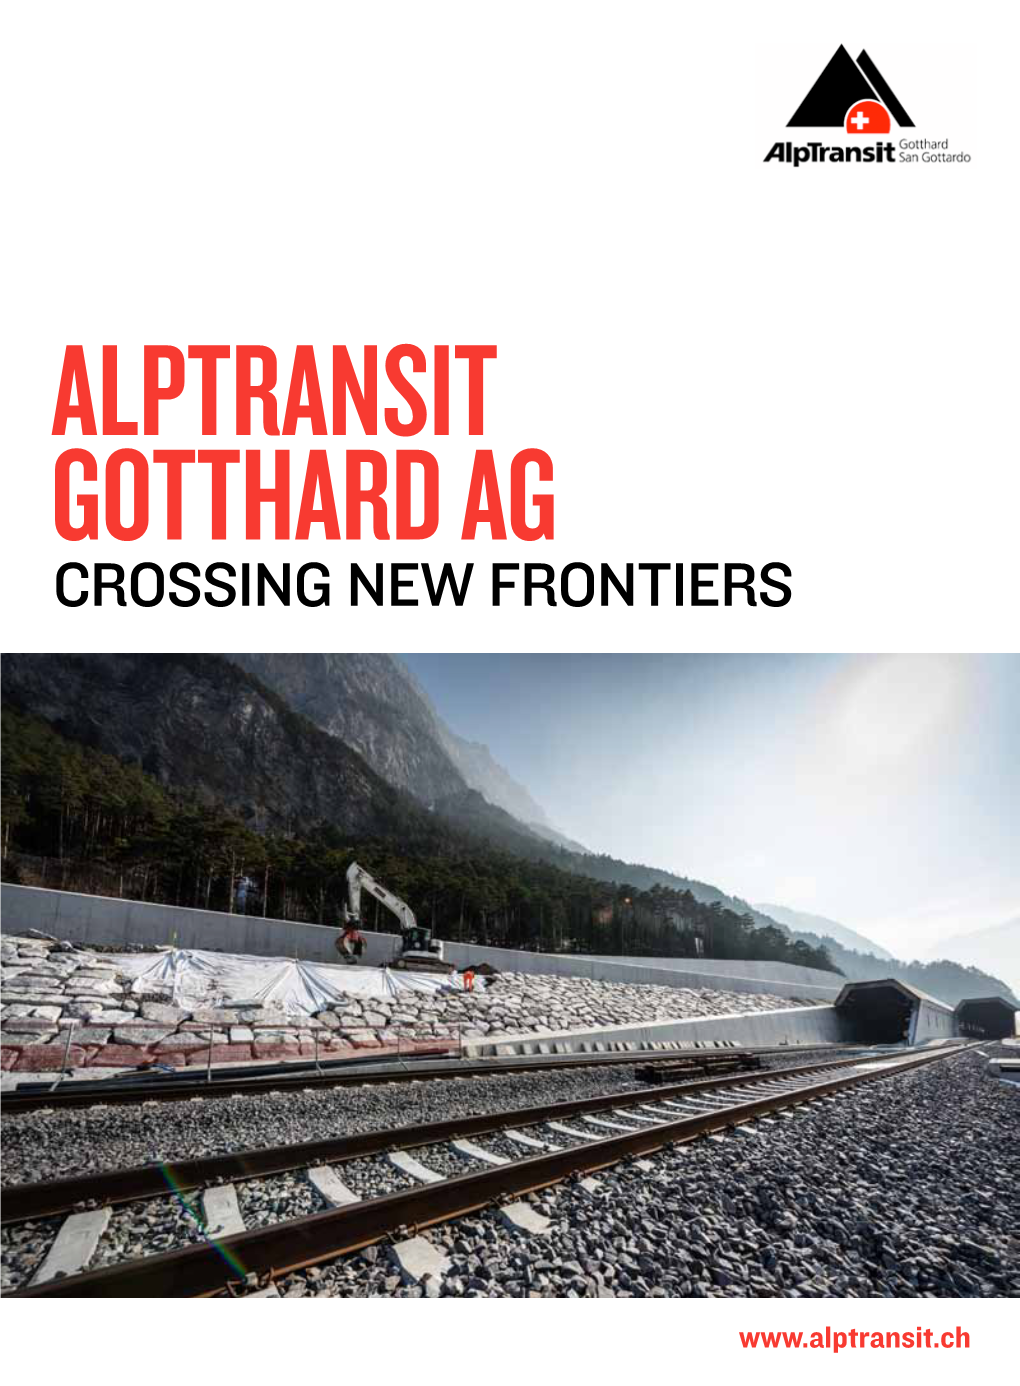 The Gotthard Base Tunnel Project